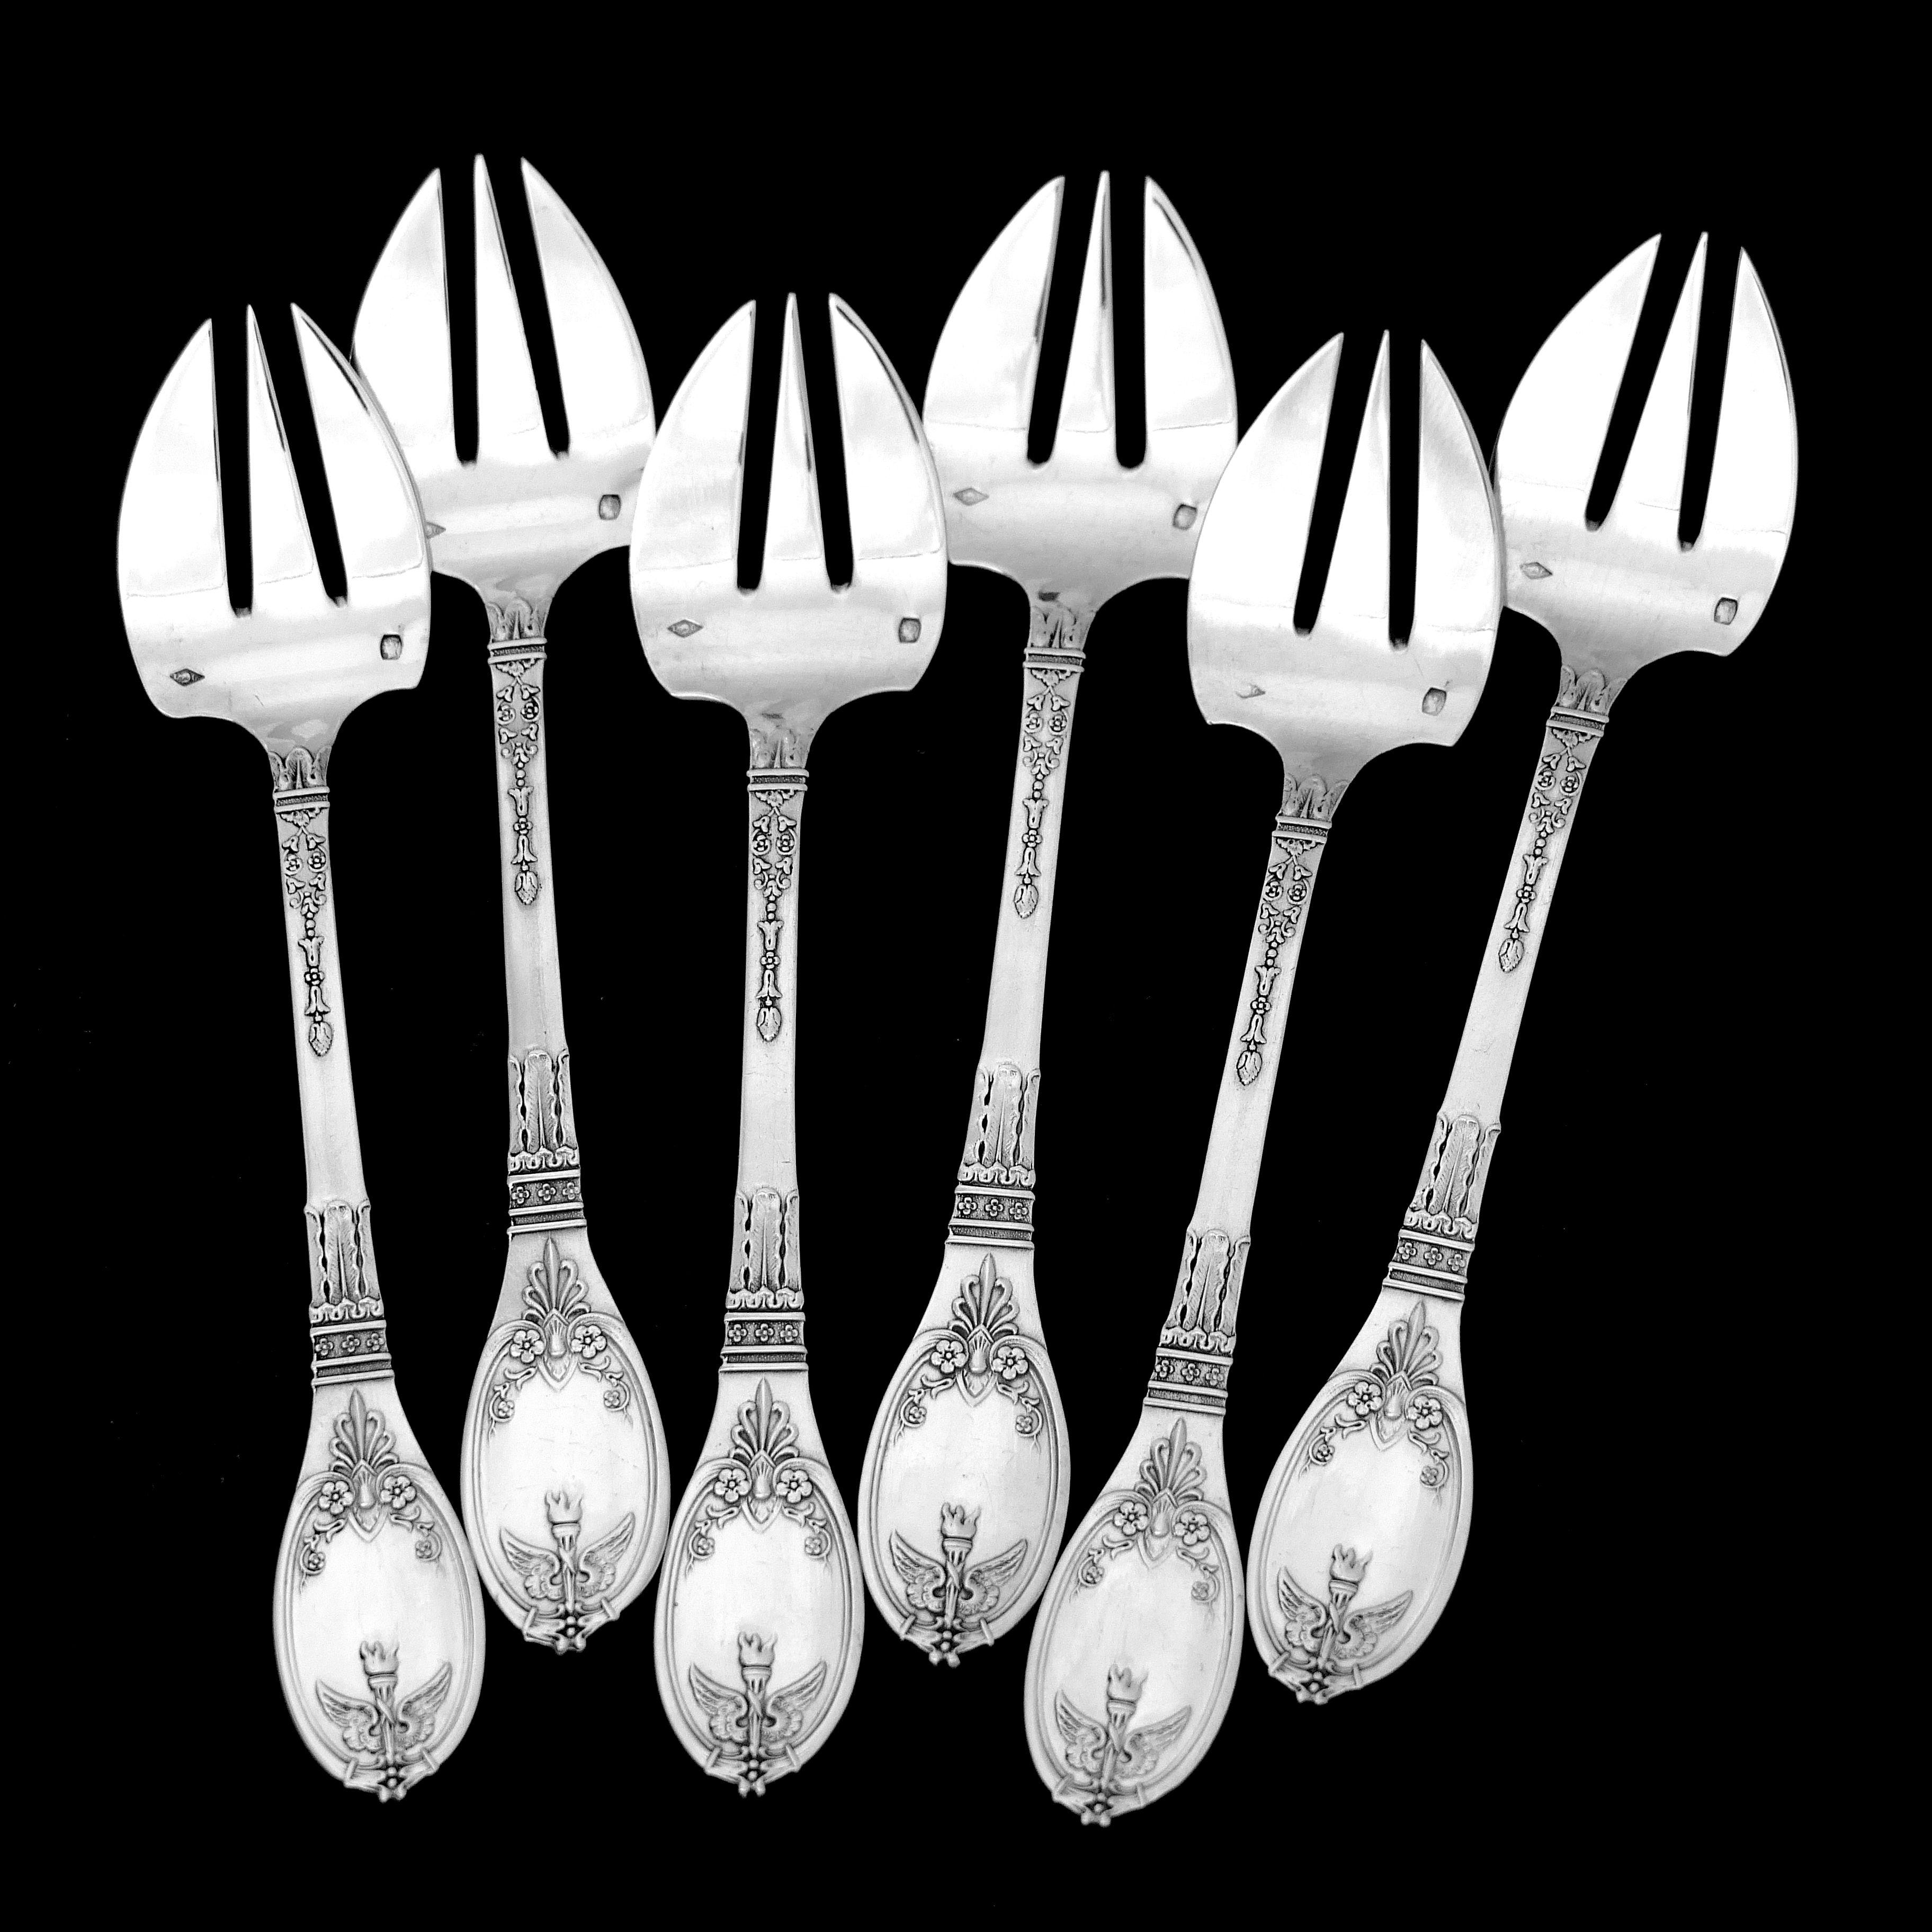 Lapparra Fabulous French Sterling Silver Oyster Forks Set 6 Pc, Empire Torch For Sale 2